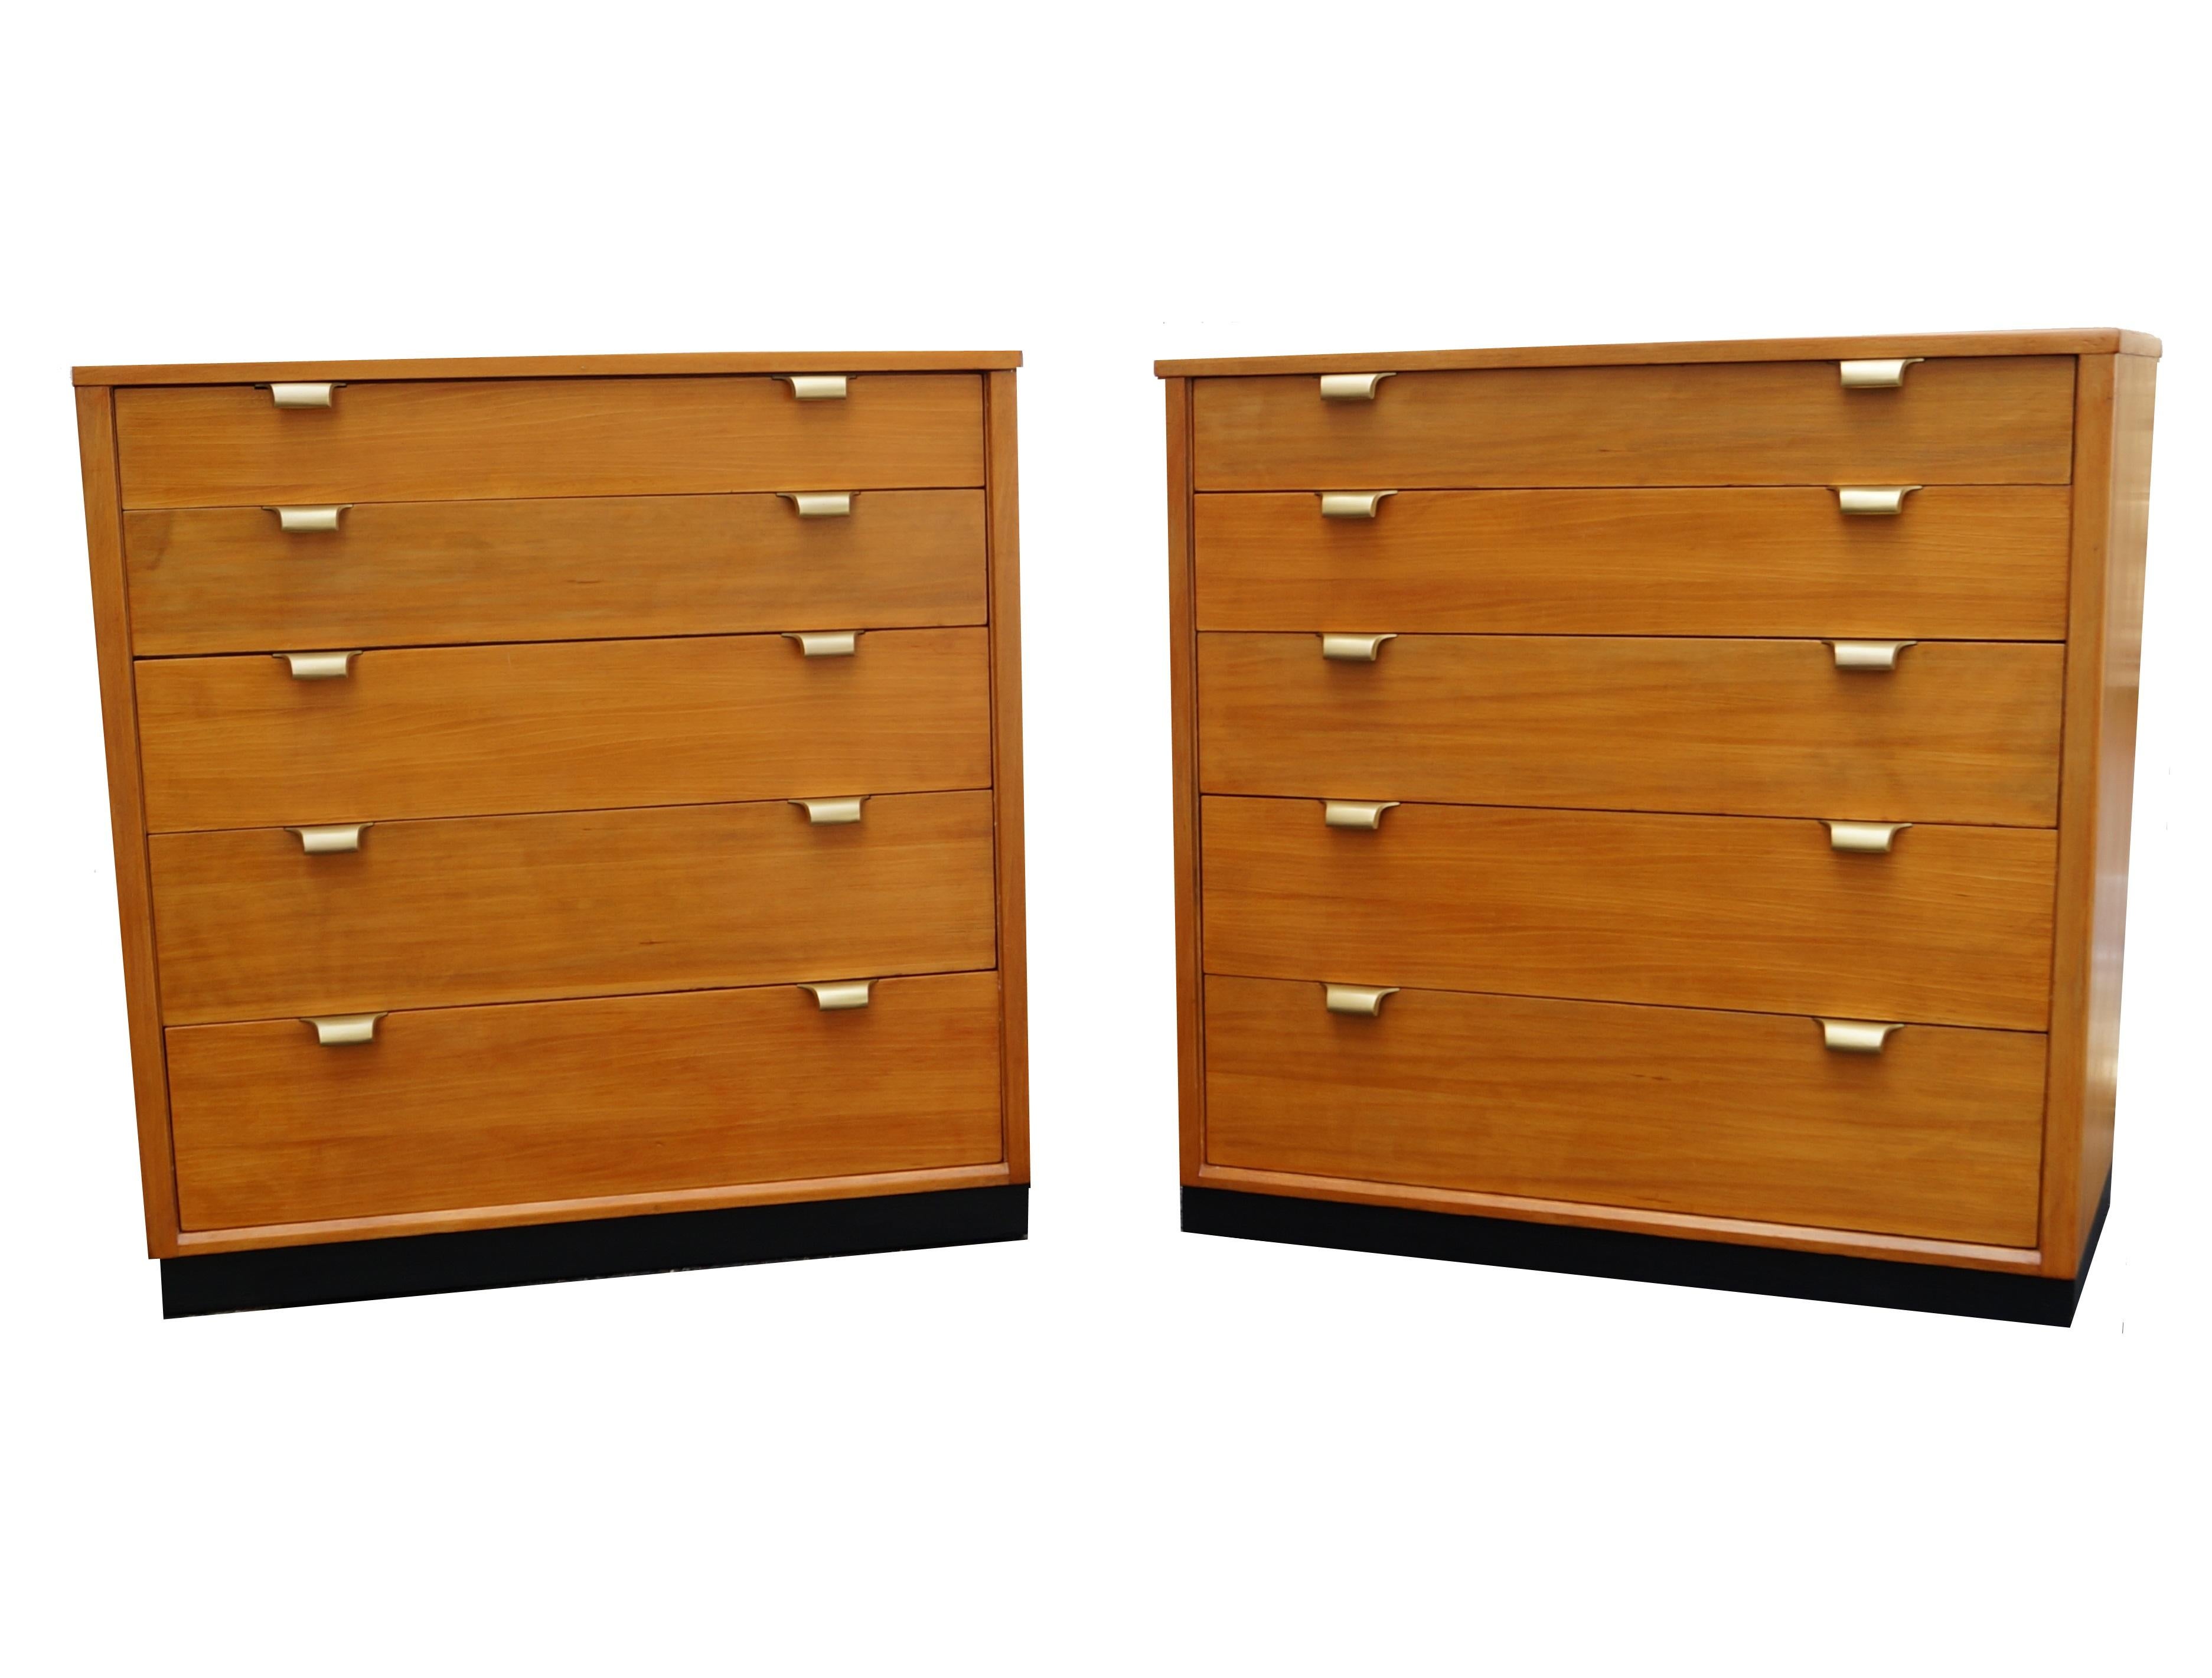 Pair of Edward Wormley precedent dressers with ebony bases.